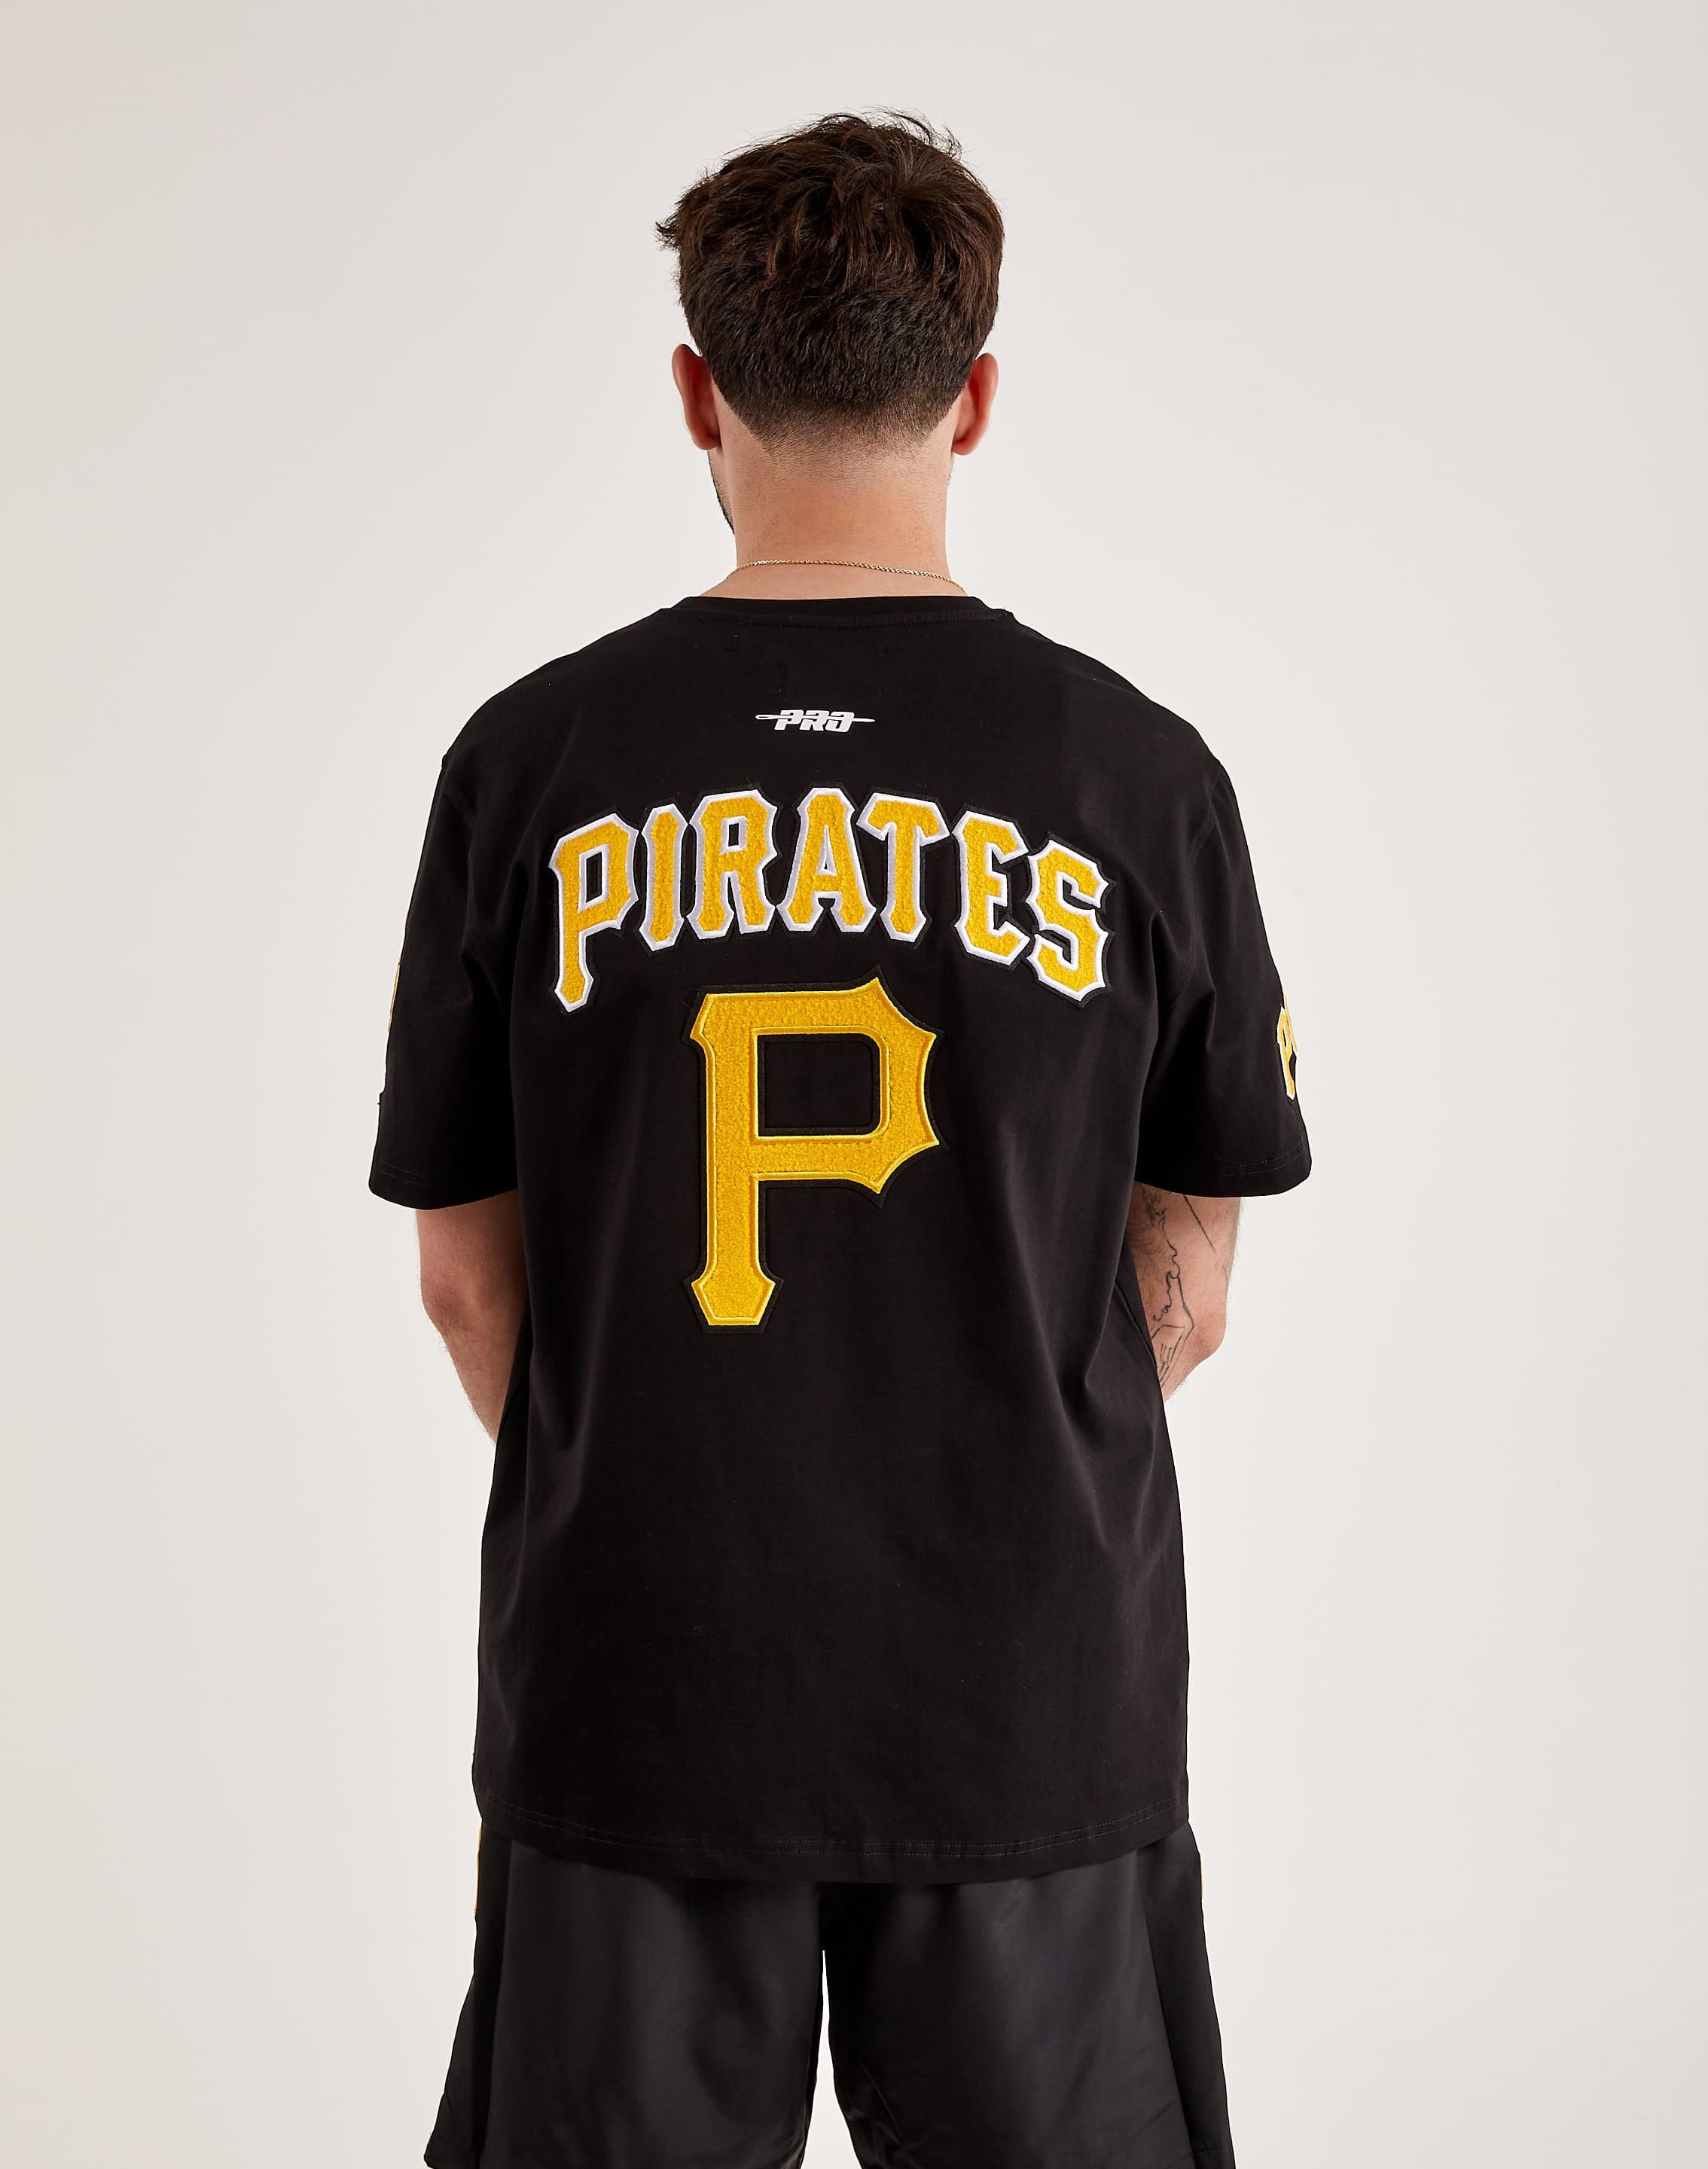 Discounted Women's Pittsburgh Pirates Gear, Cheap Womens Pirates Apparel,  Clearance Ladies Pirates Outfits